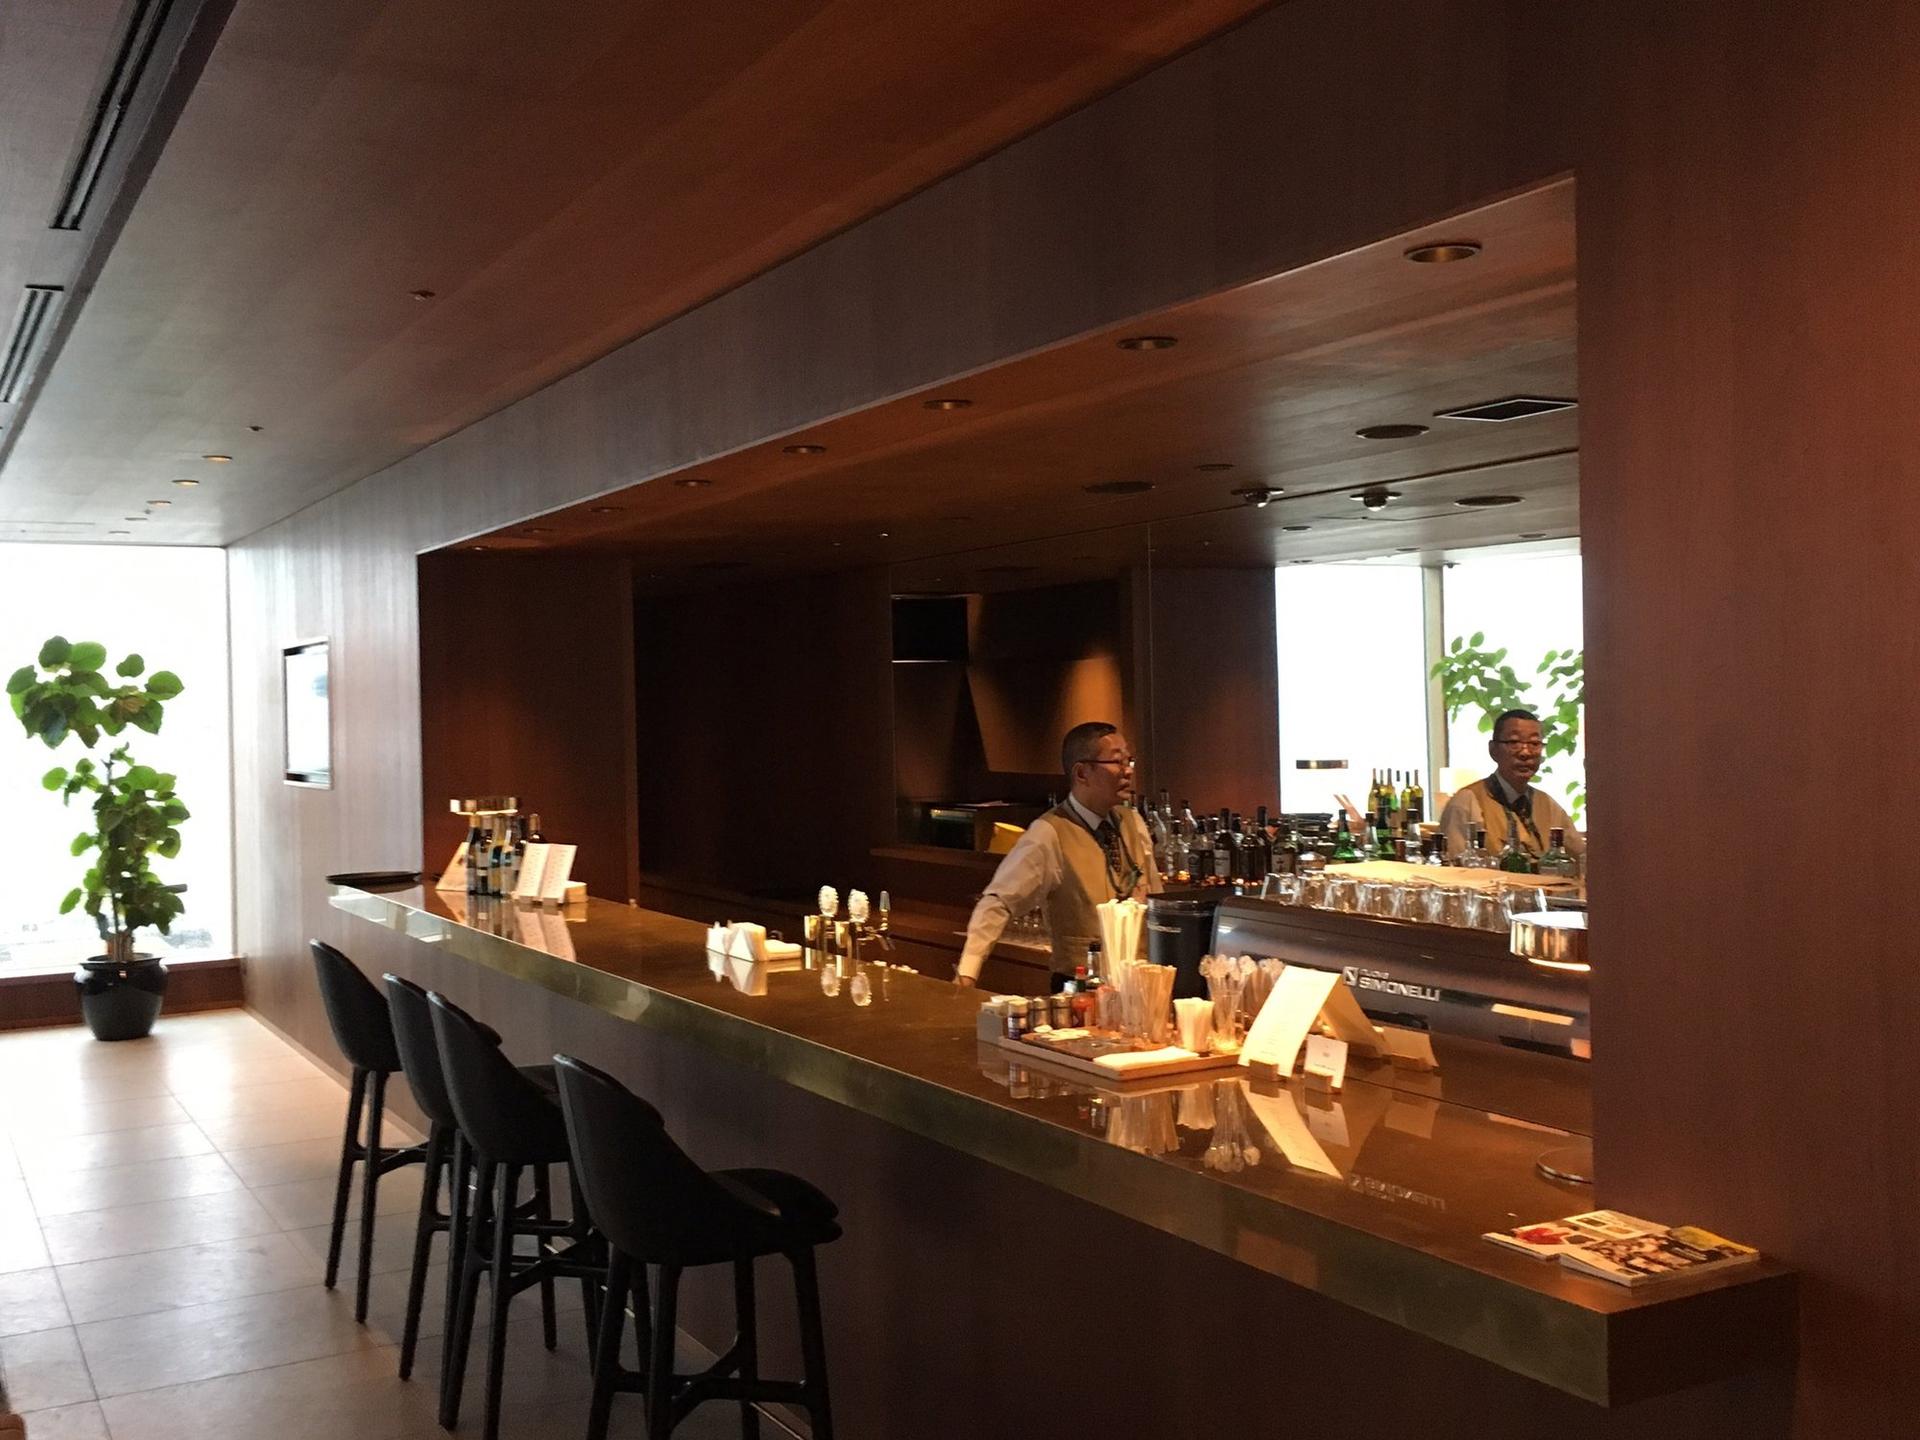 Cathay Pacific Lounge image 19 of 49